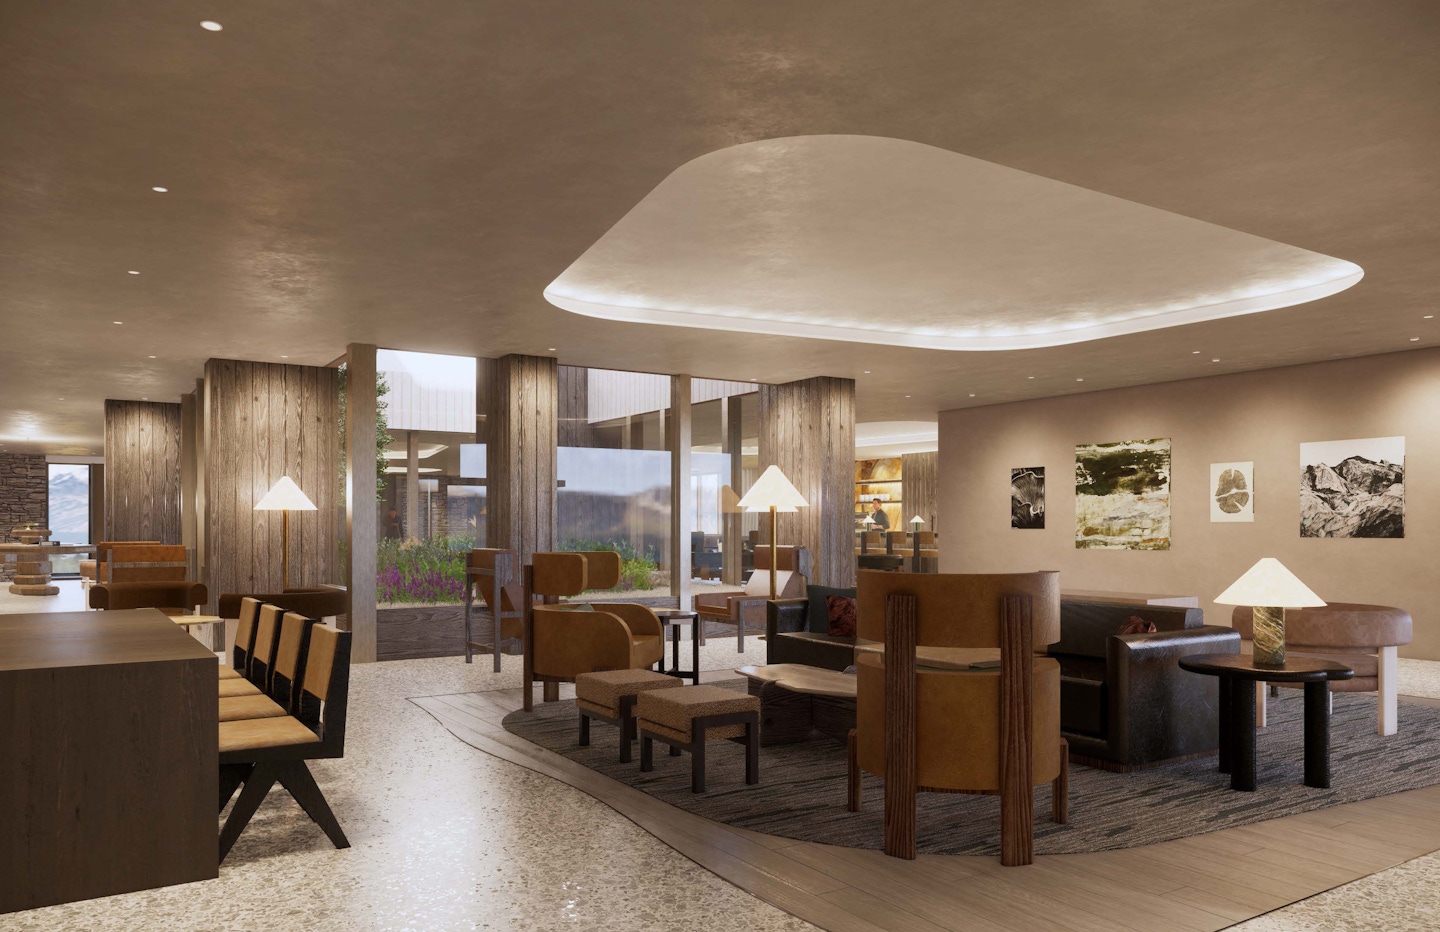 Aspen Club lobby lounge and workspace  |  Concept rendering by INC Architecture & Design